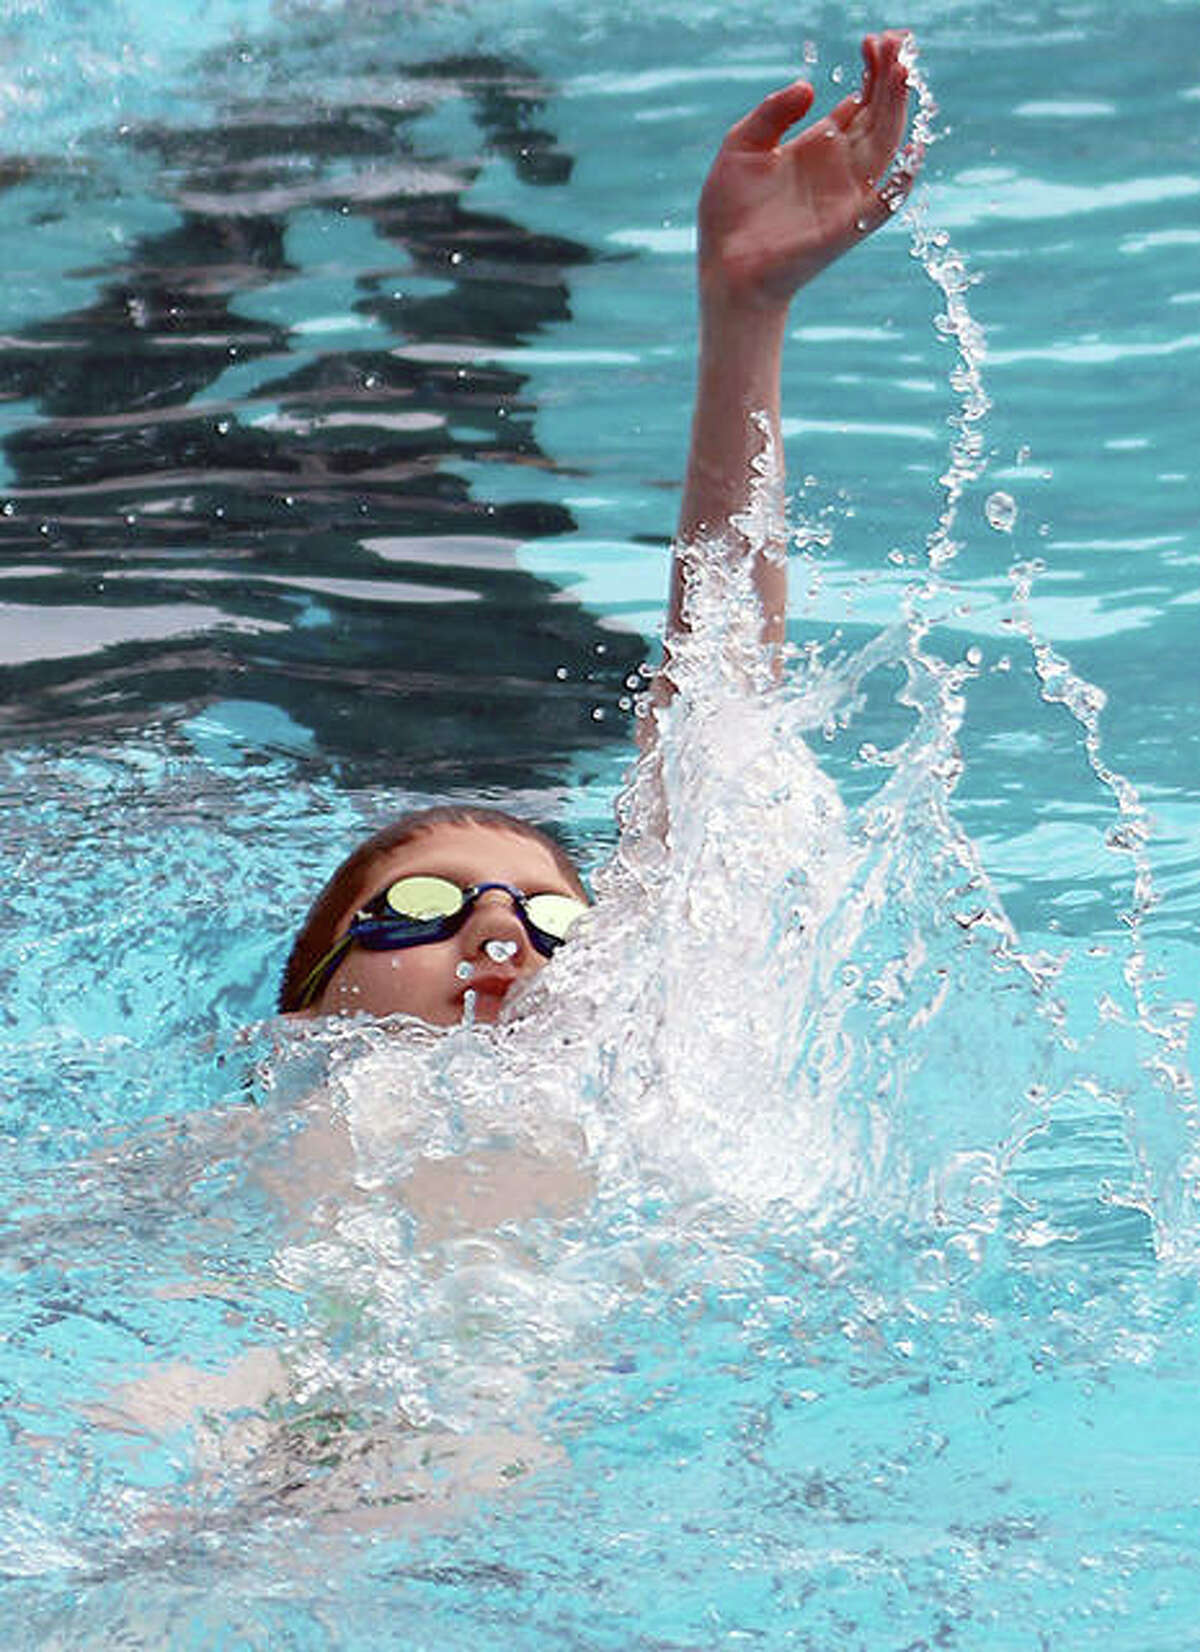 Eric Humphrey of the Summers Port Sharks swim team works swims the backstroke during a practice session Tuesday.